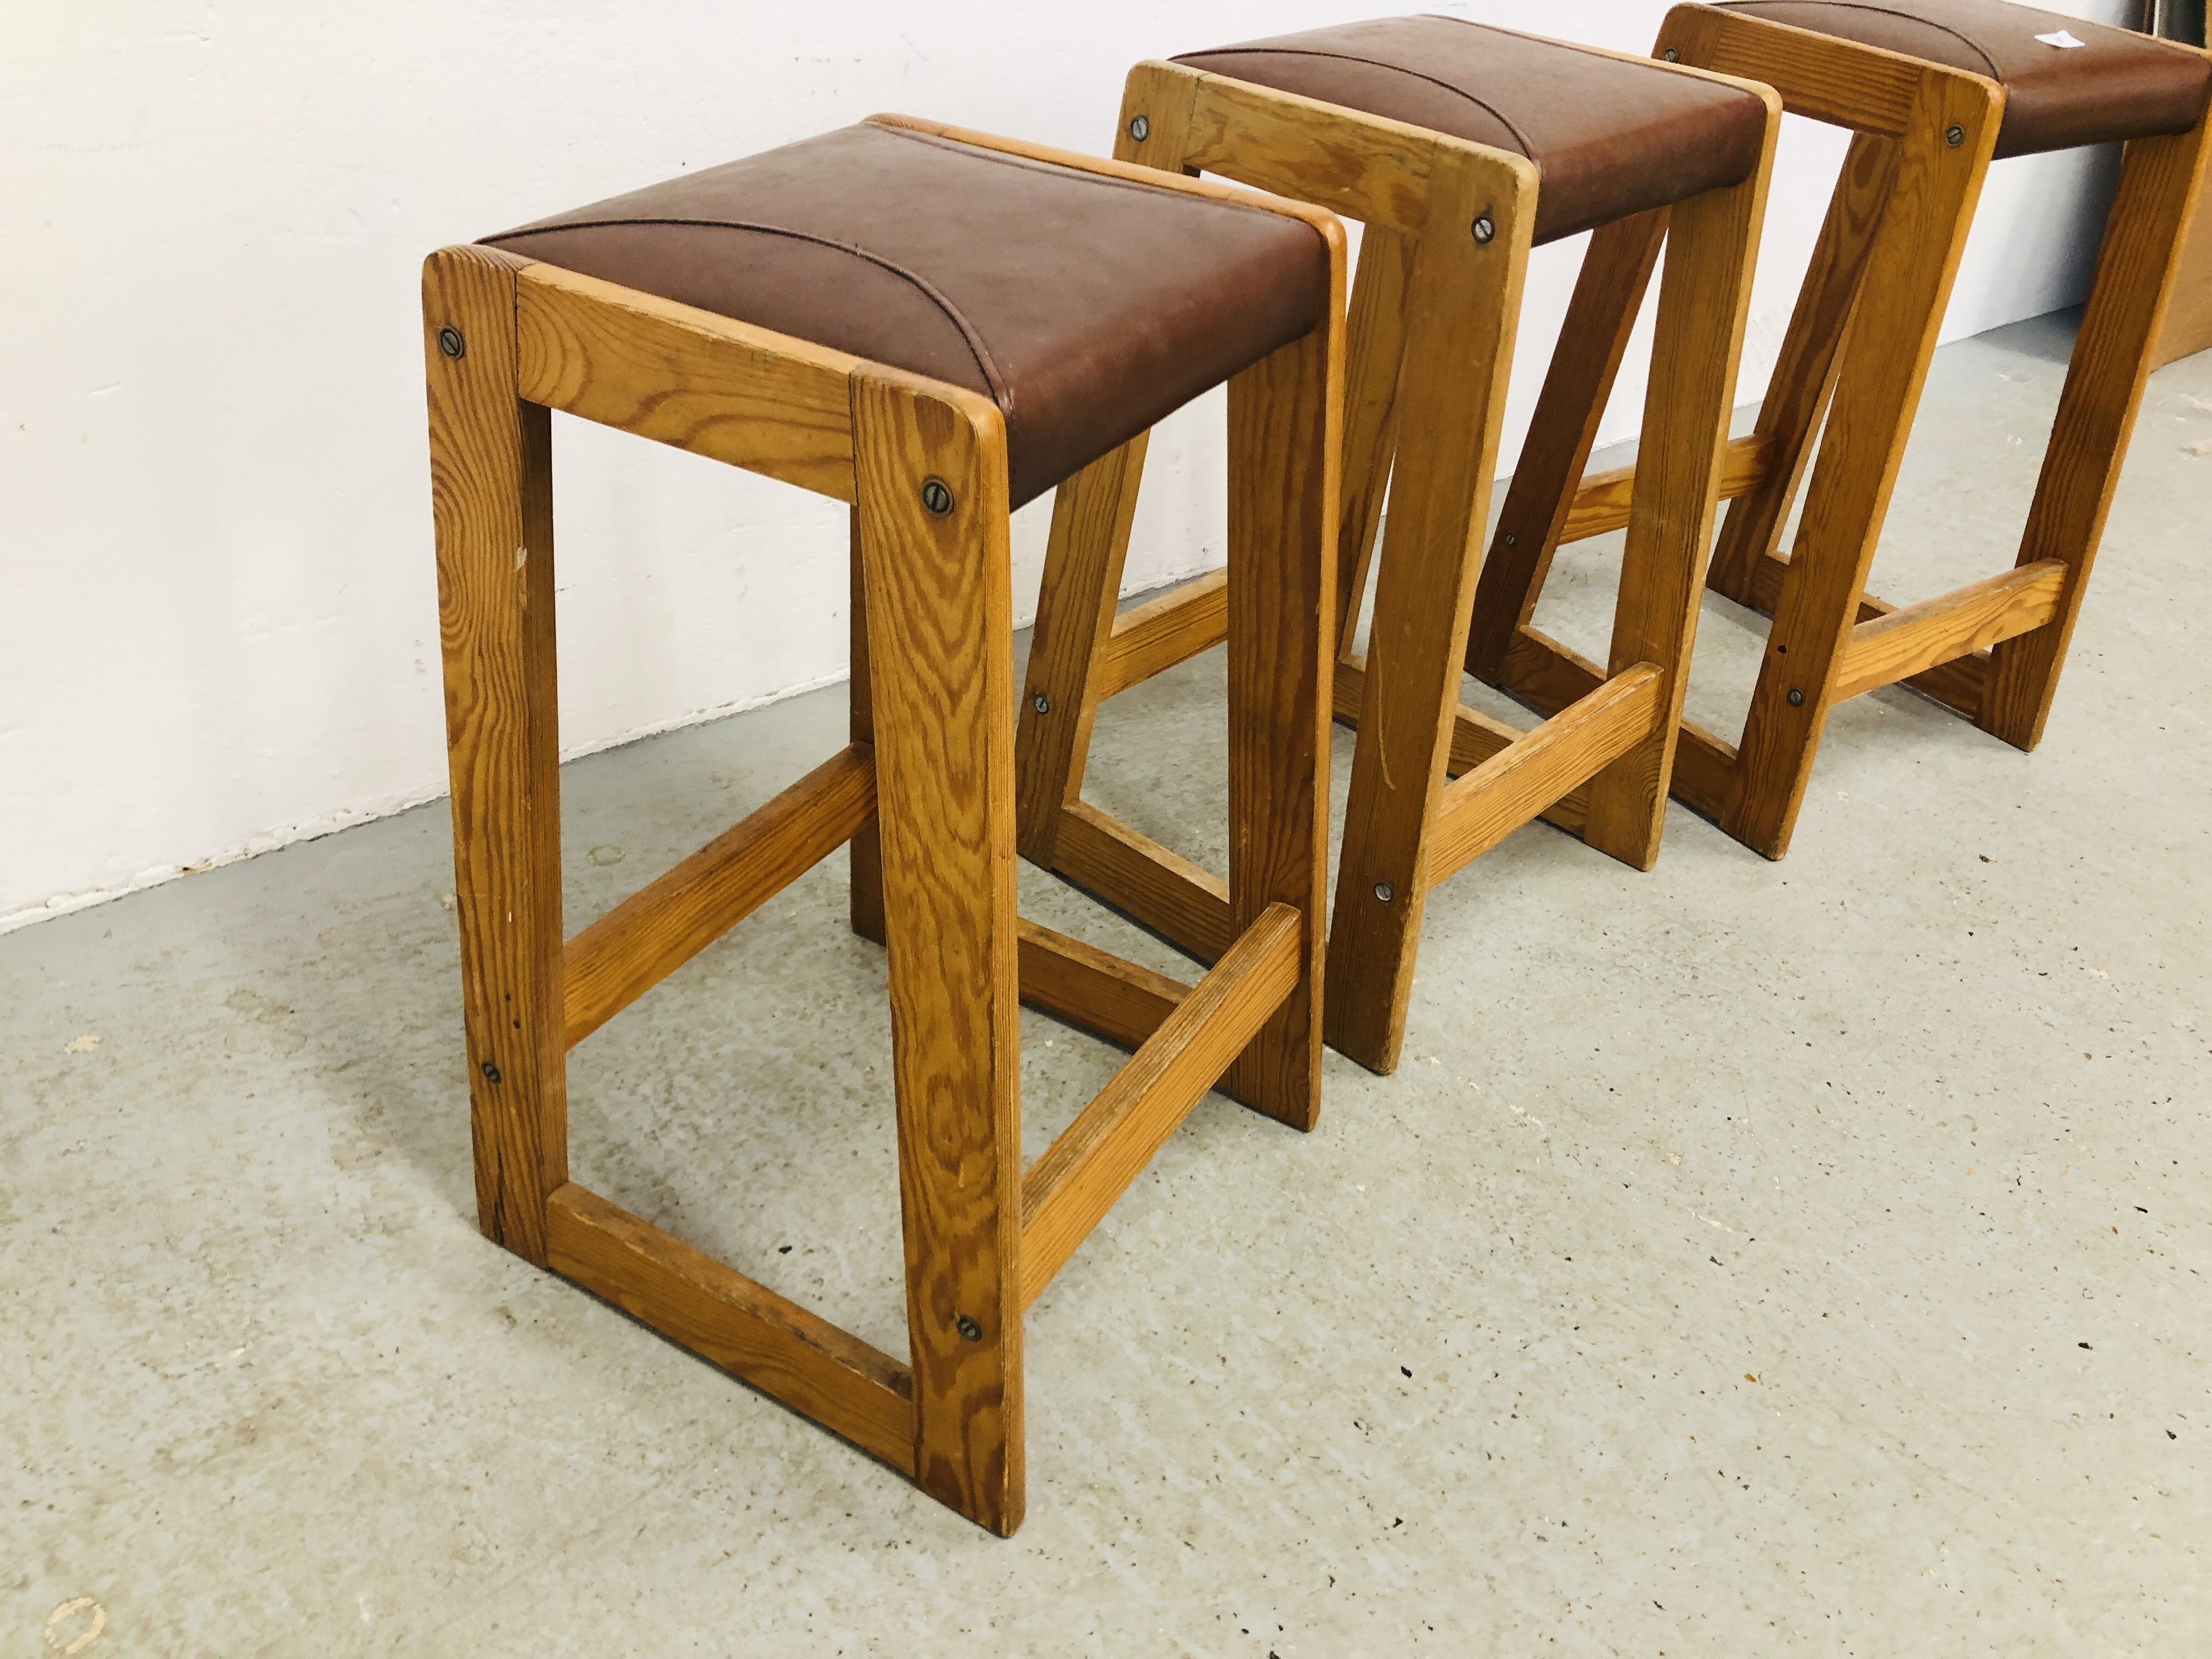 THREE PINE FRAMED BREAKFAST BAR STOOLS WITH BROWN LEATHER PADDED SEAT HEIGHT 62CM. - Image 4 of 4